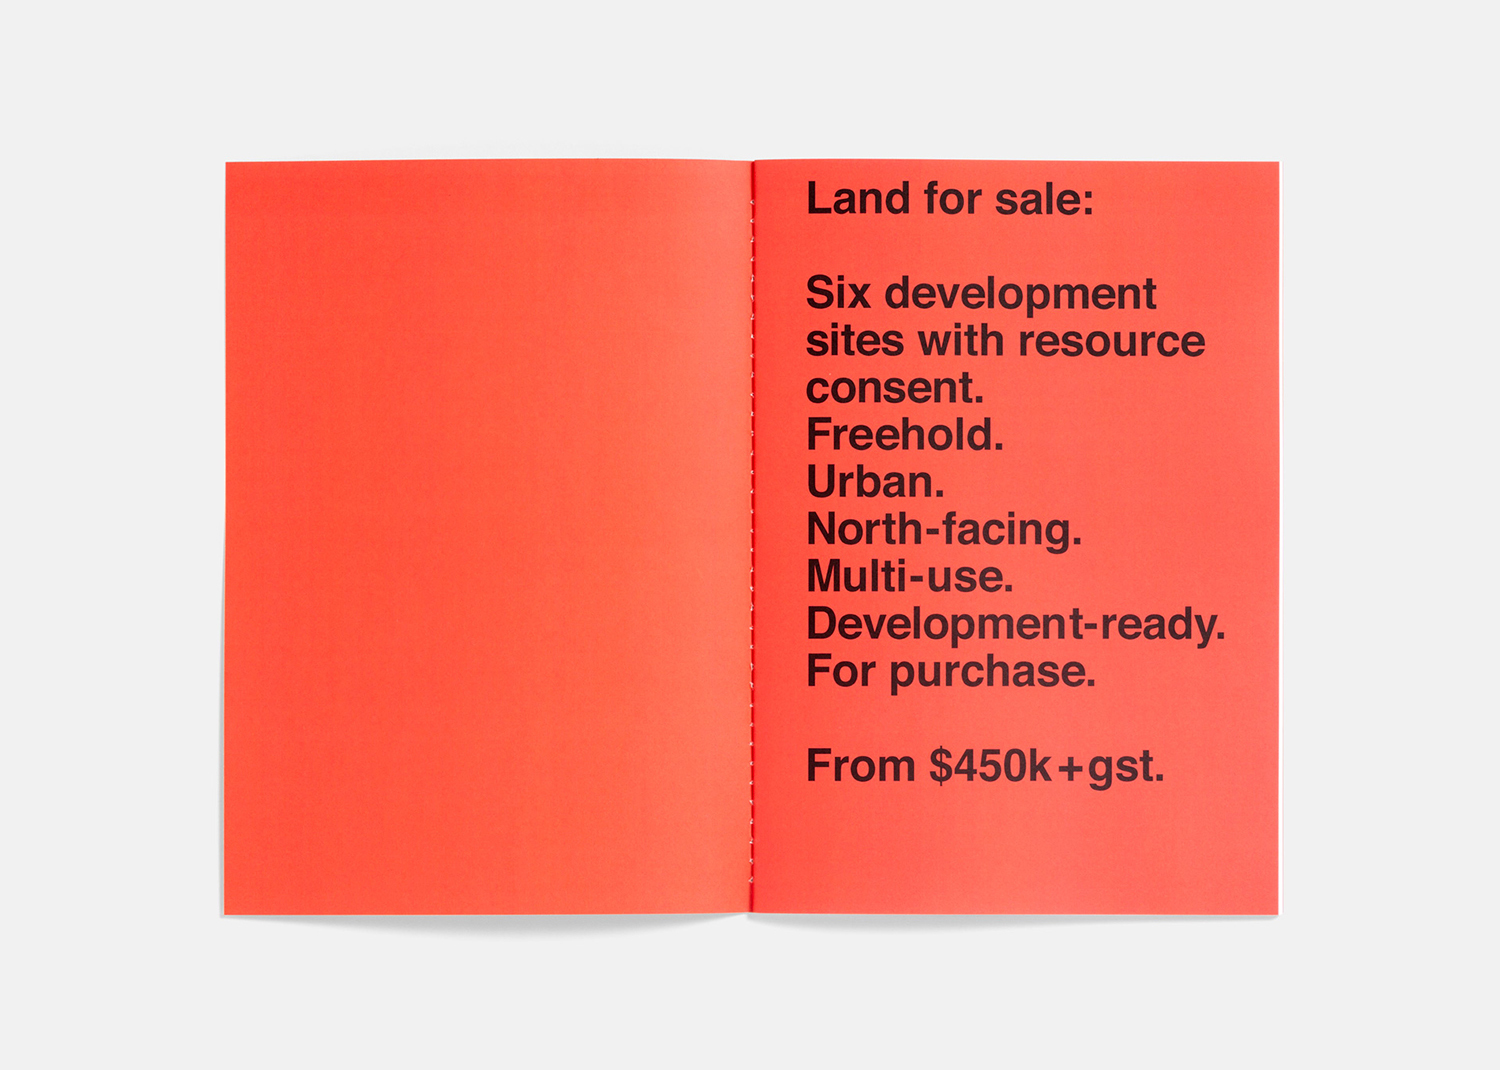 Visual identity and brochure design by Studio South for Outline, a six lot property development opportunity in Auckland